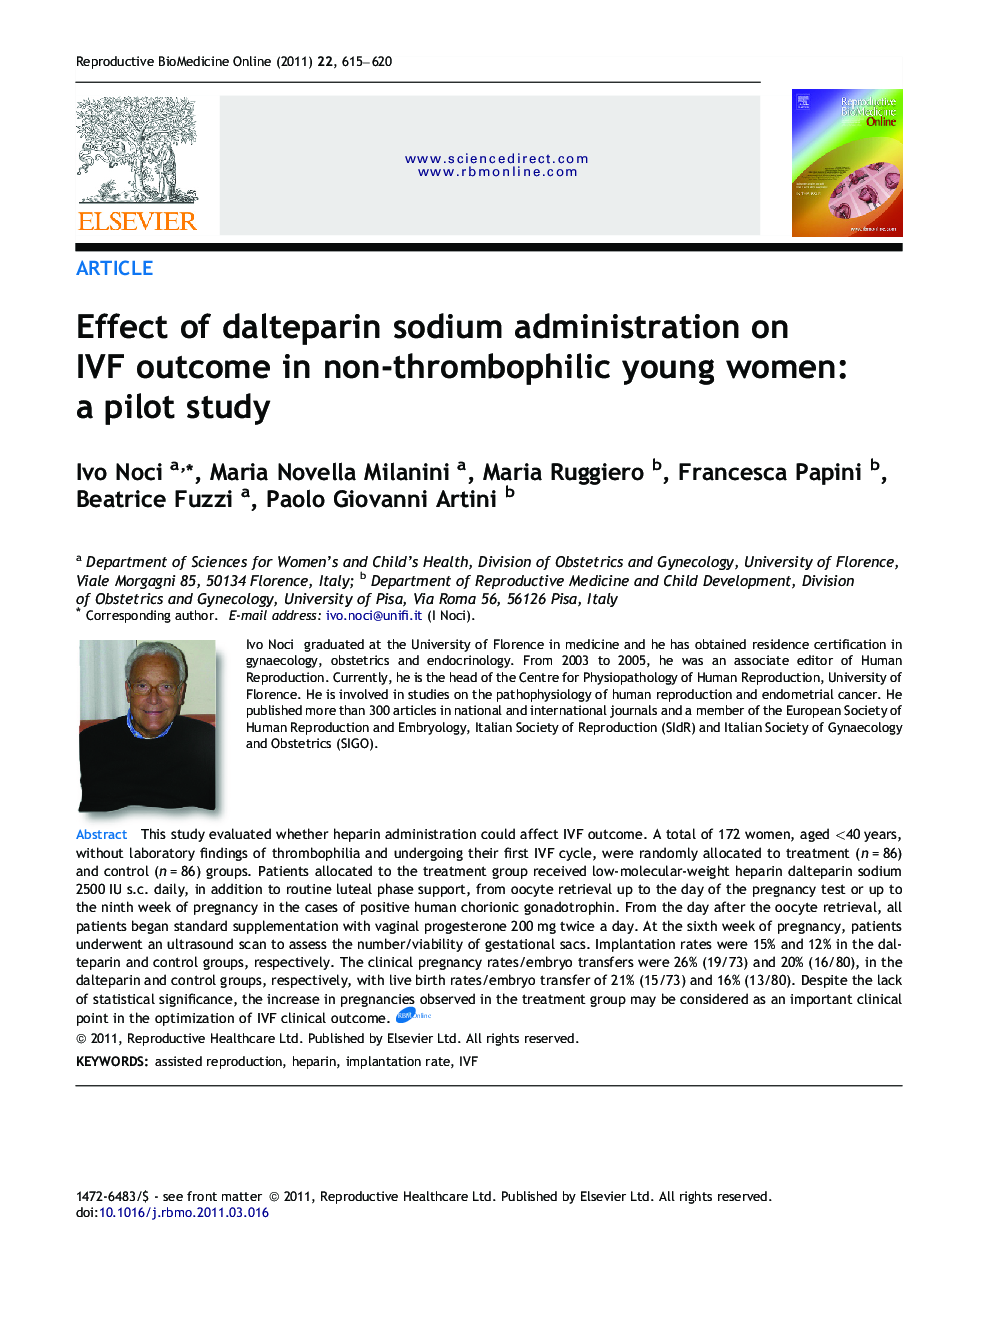 Effect of dalteparin sodium administration on IVF outcome in non-thrombophilic young women: a pilot study 